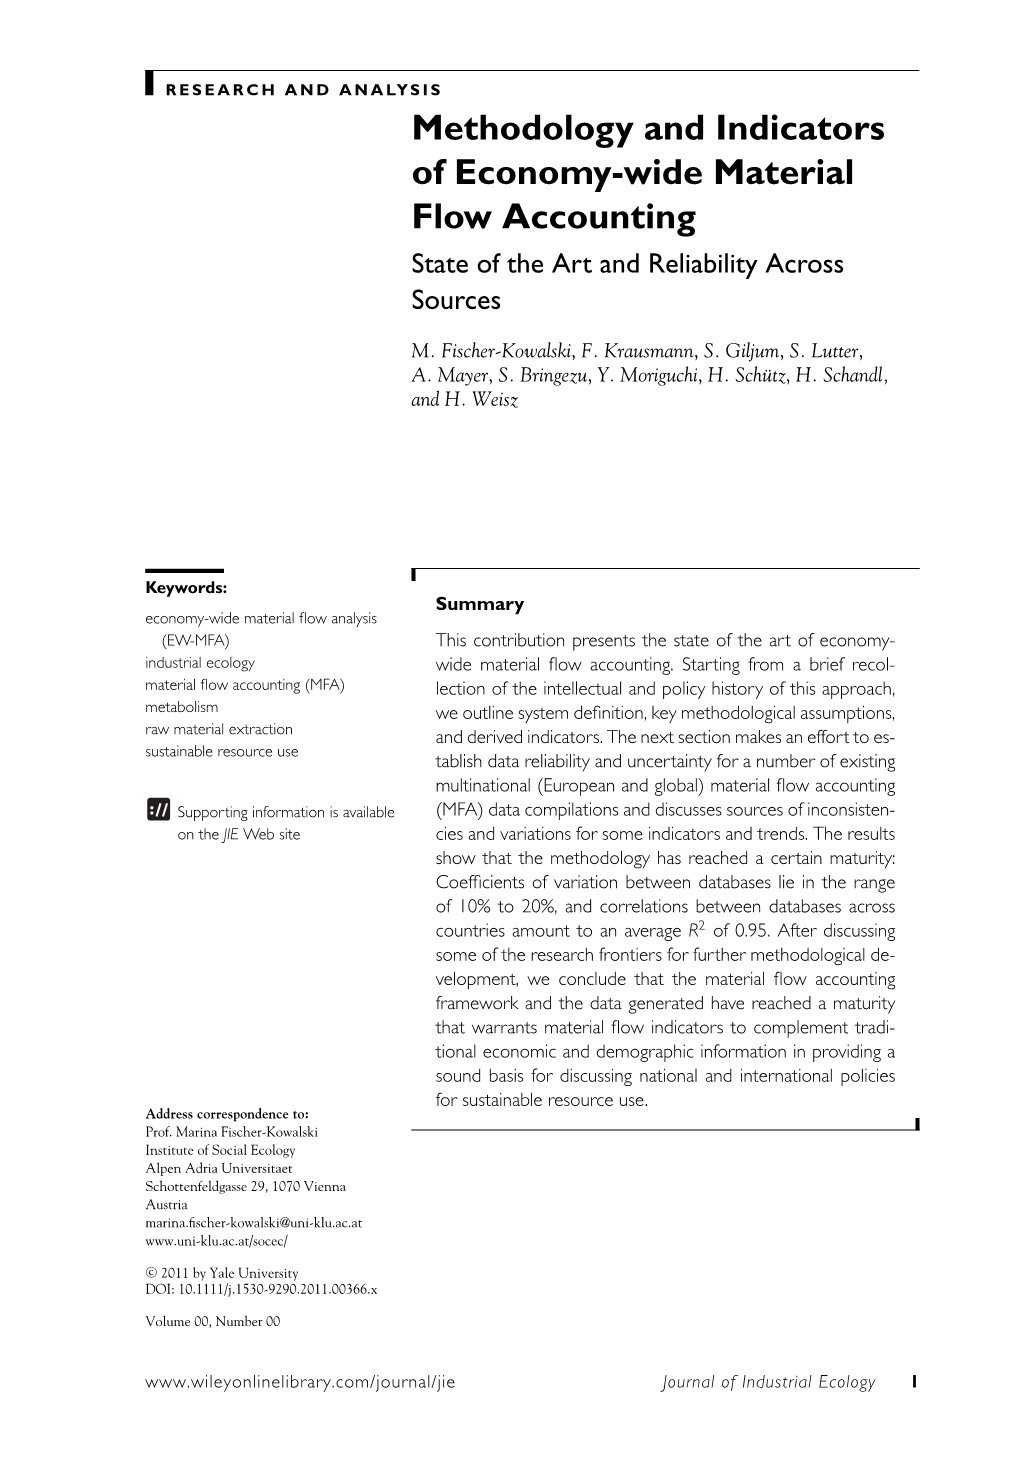 Methodology and Indicators of Economywide Material Flow Accounting State of the Art and Reliability Across Sources